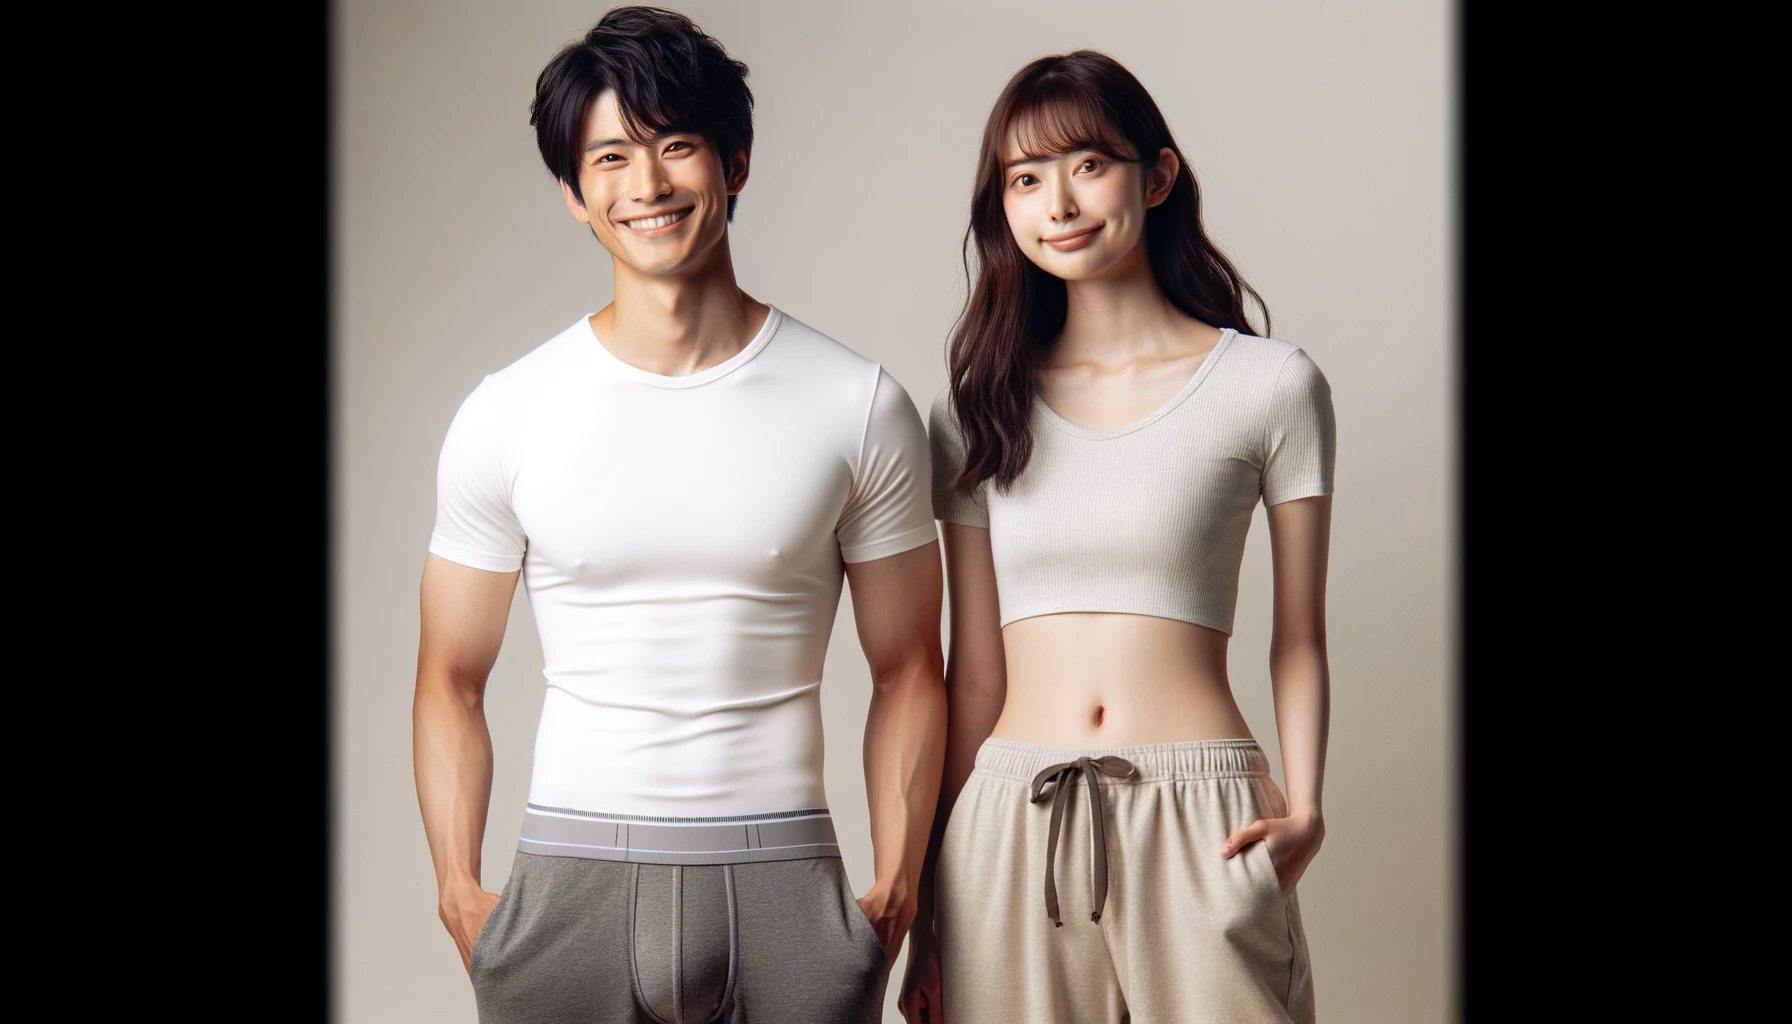 A Japanese man and woman wearing plain, stylish underwear and casual clothes, without any logos or text, on a plain background. The man is in a white t-shirt and dark pants, the woman is in a light gray top and beige pants. Both are smiling and standing next to each other.